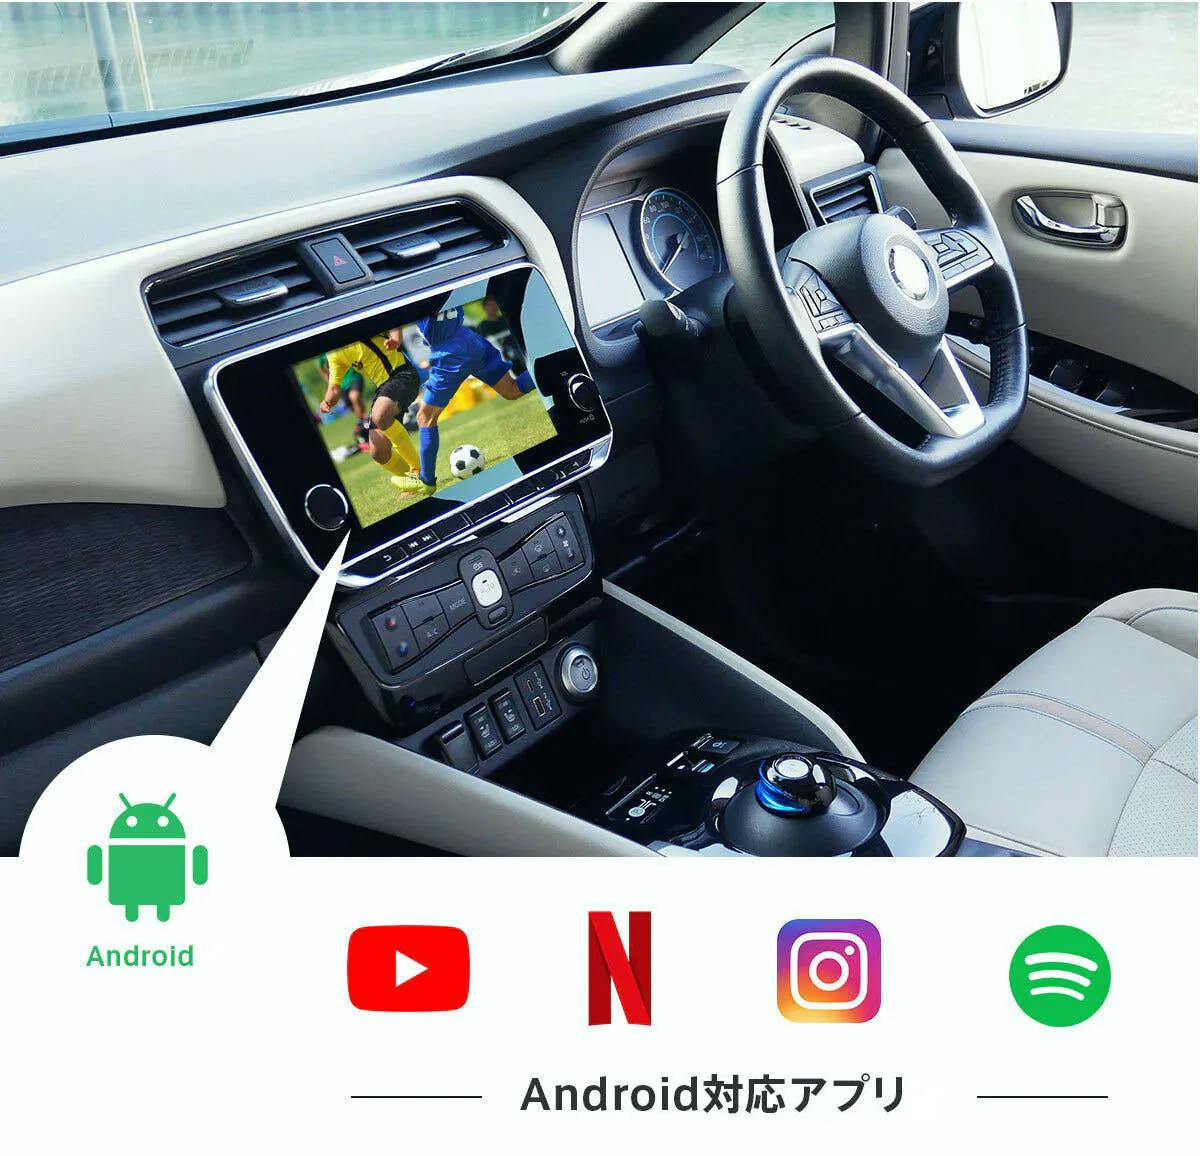 CarDongle Android搭載 車載ナビ 車載動画And